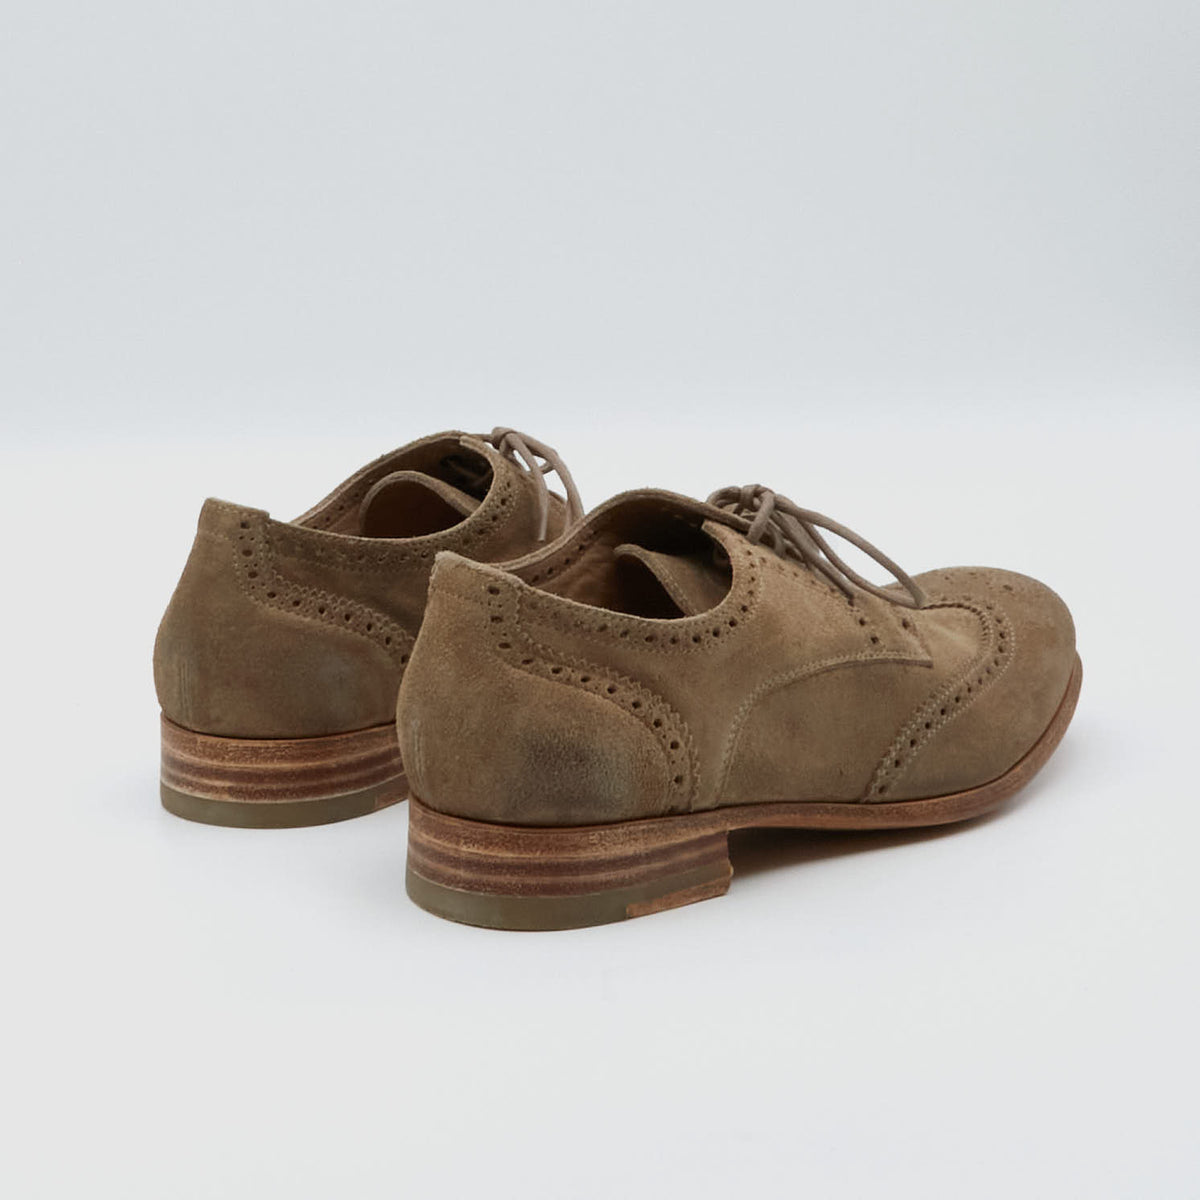 n.d.c made by hand Ladies Suede  Brogues Shoes